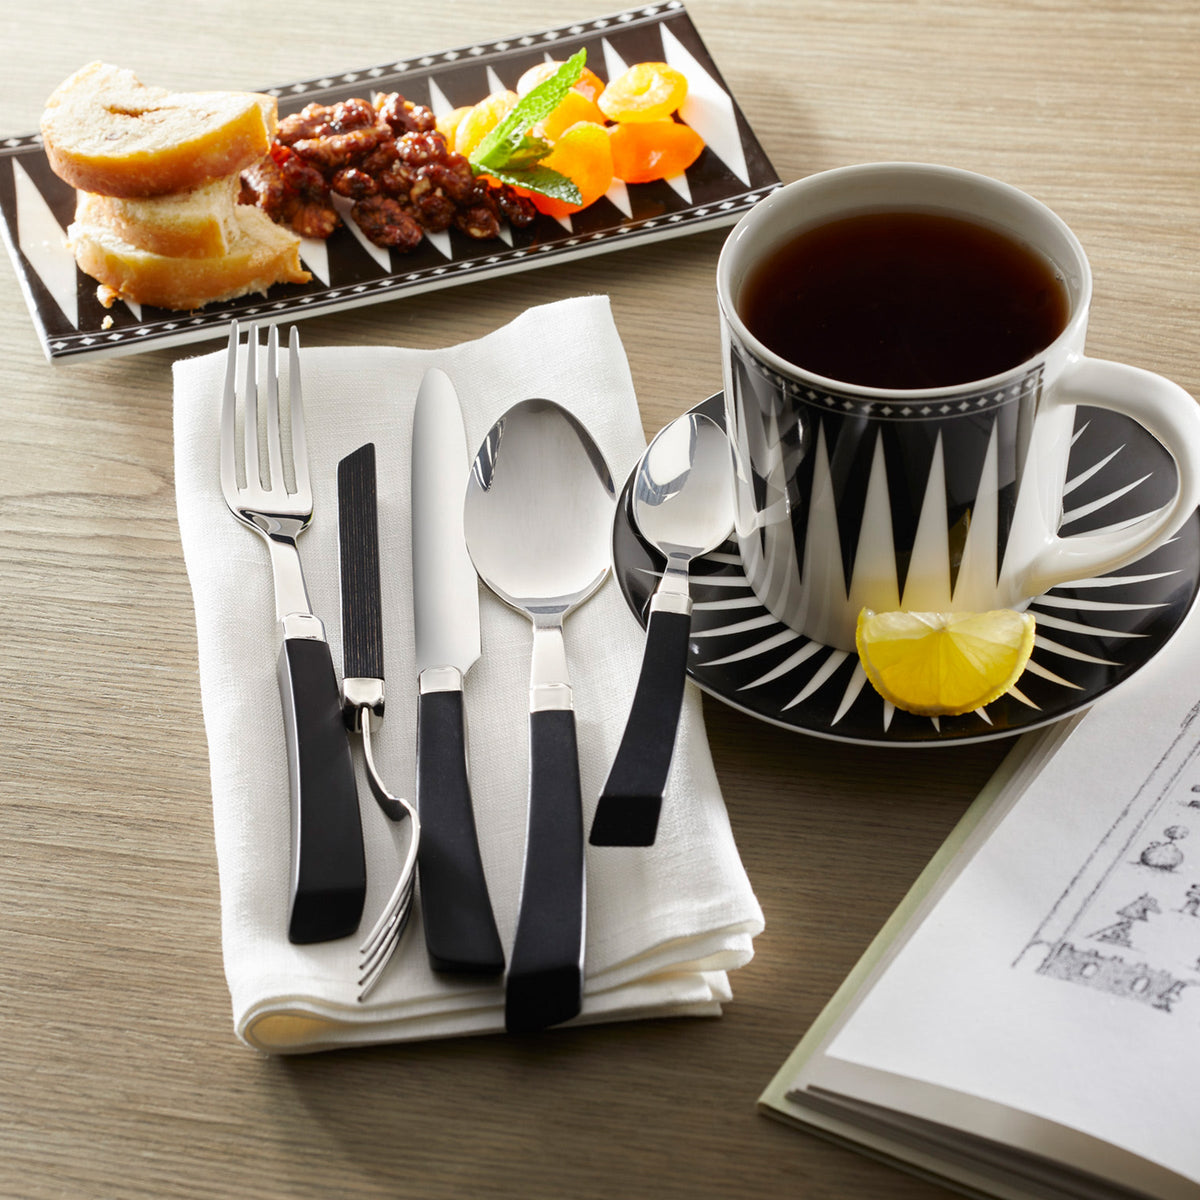 A set table with a mug of black tea with a lemon slice, a fork, knife, and spoon on a napkin, alongside a plate of appetizers and sliced bread on a wooden surface. Nearby, a Marrakech Large Sushi Tray by Caskata adds an elegant touch to the arrangement.